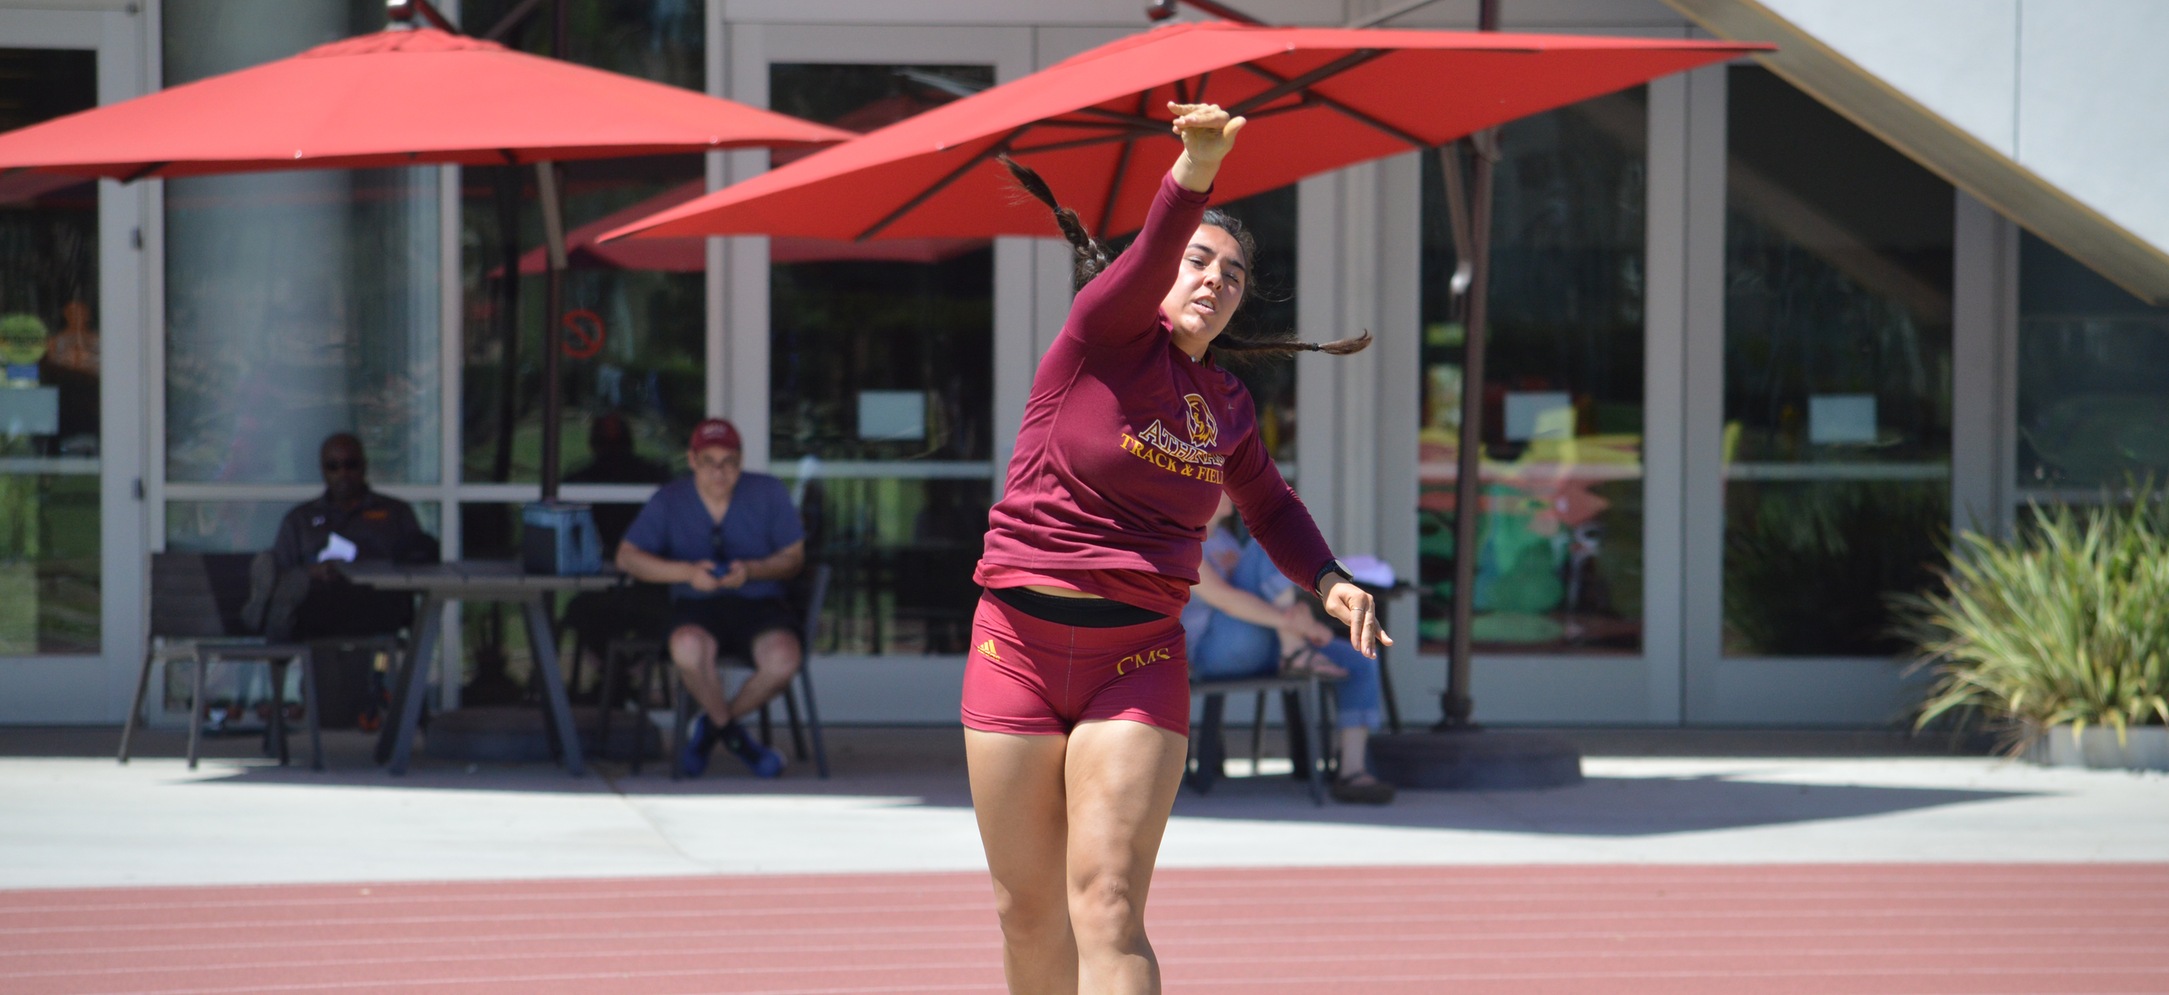 Emily Bassett (CMC) hit an NCAA qualifying mark in the discus throw. (photo credit: Hannah Graves)